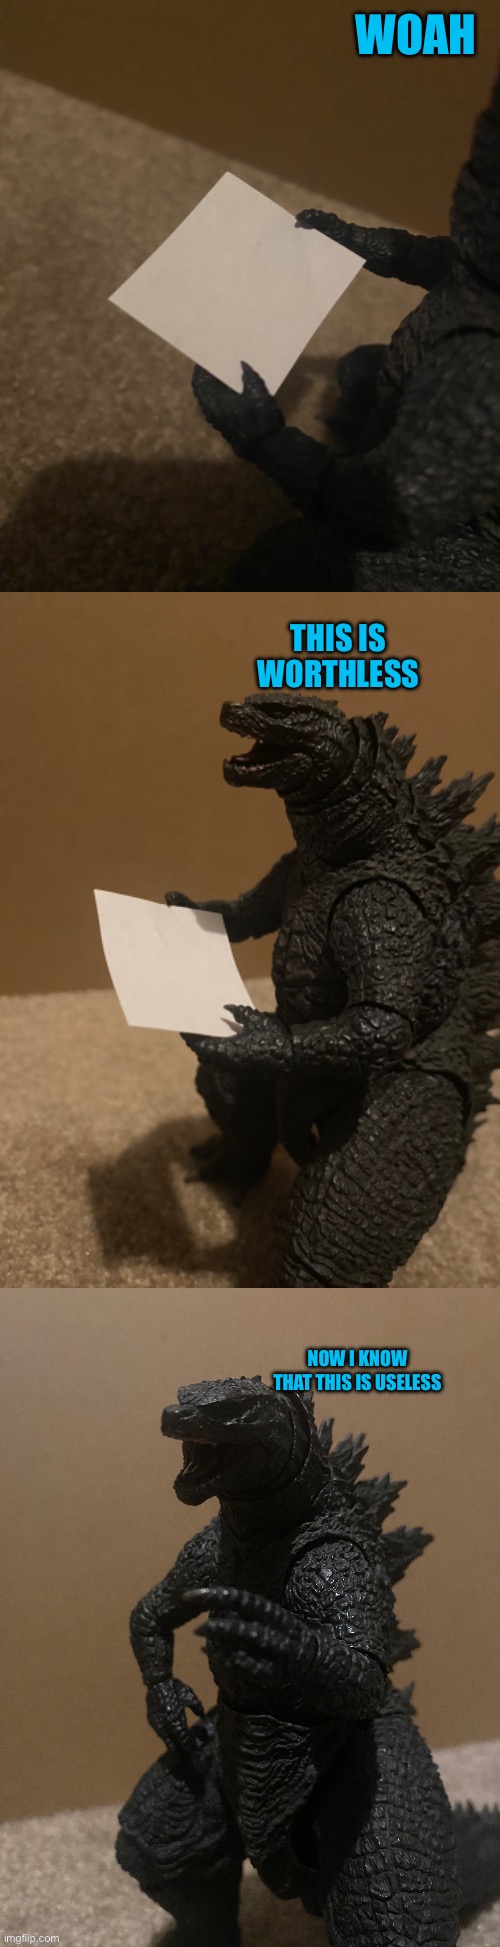 This is worthless (Godzilla Edition) Blank Meme Template